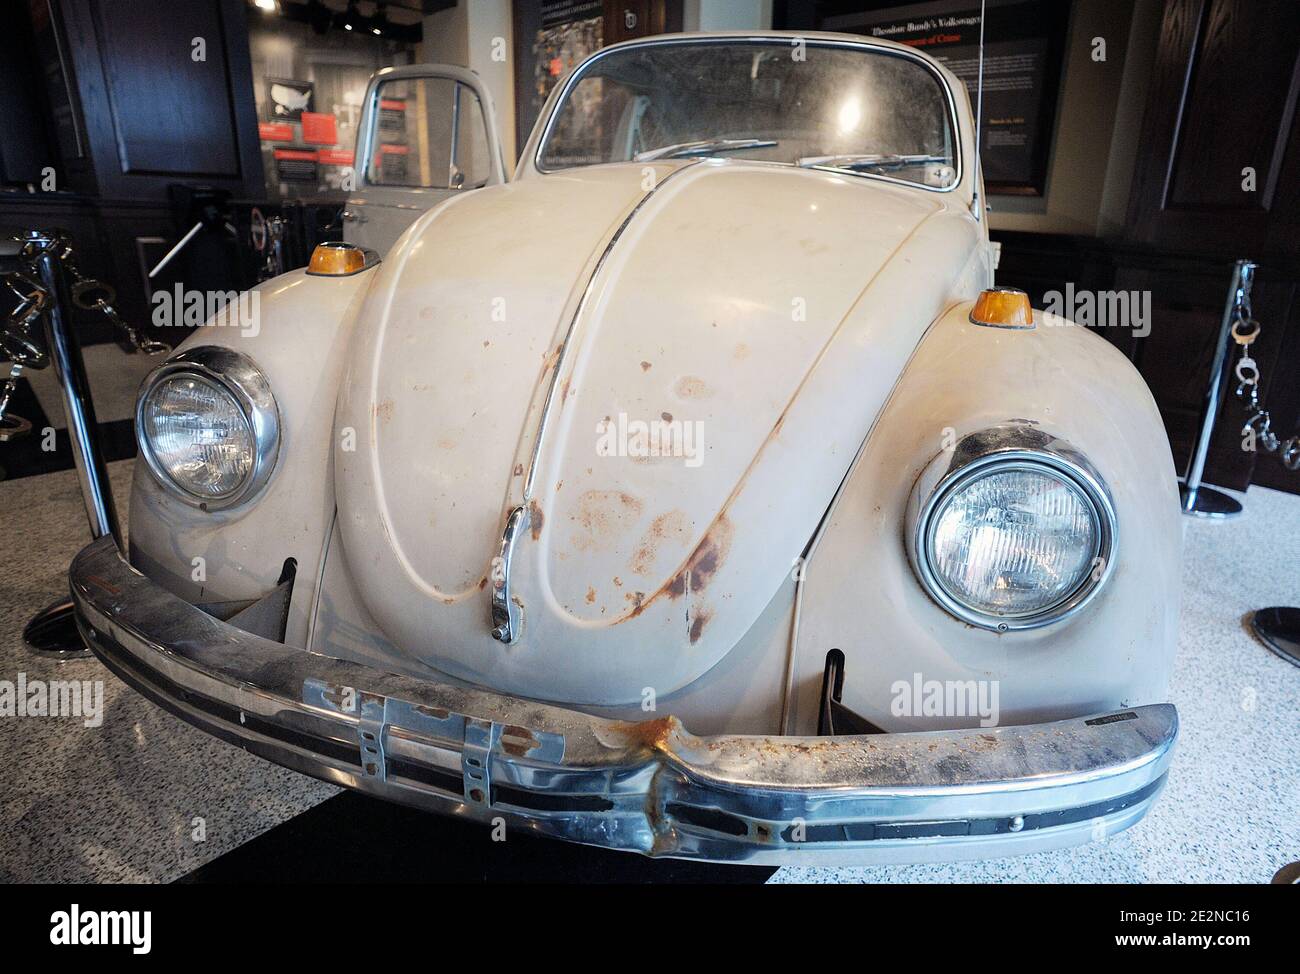 Ted BundyÍs VW Beetle on display at the National Crime and Punishment  Museum on February 22, 2010 in Washington, DC. Bundy's beat up 1968  Volkswagen Beetle was integral to his serial murders.